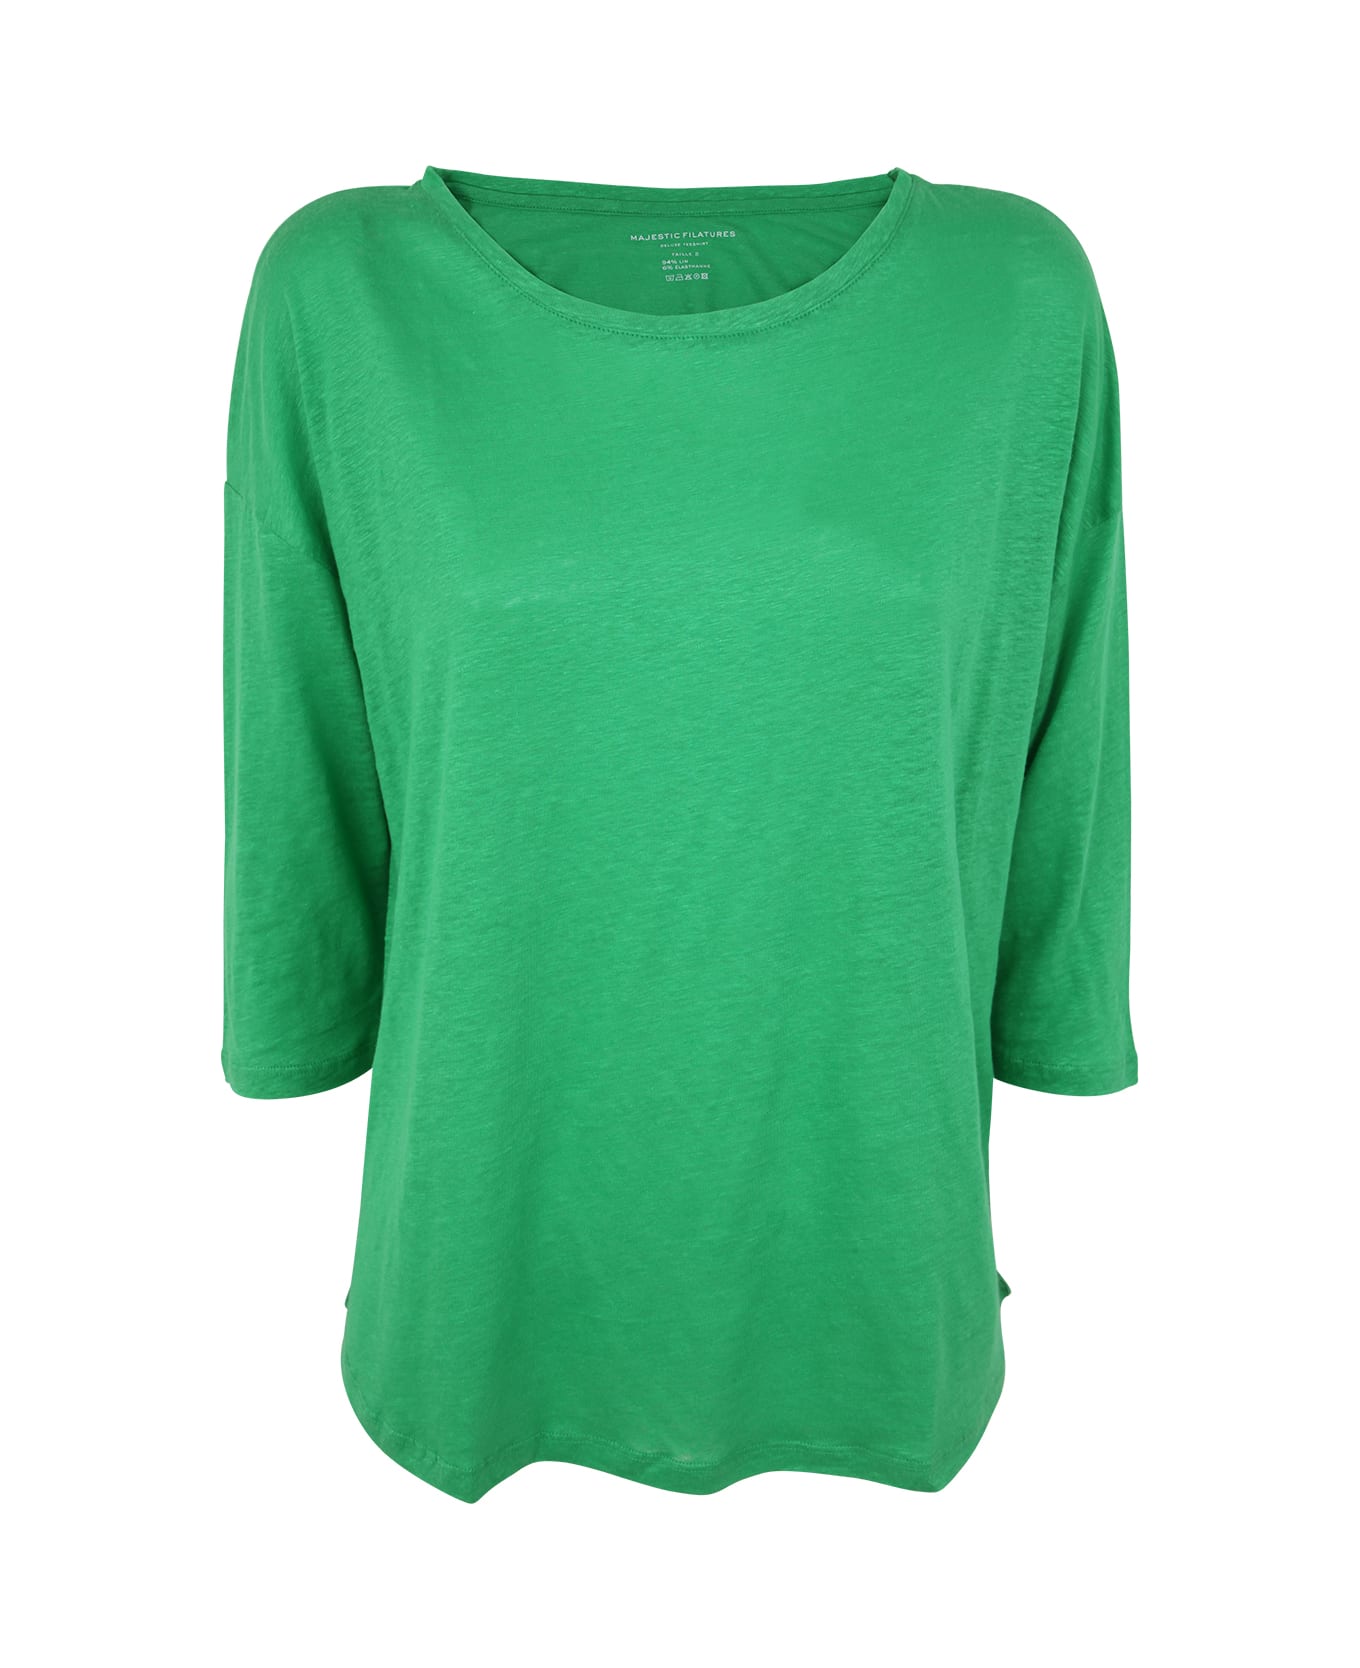 Majestic Filatures 3/4 Sleeves Boat Neck Sweater - Apple Green